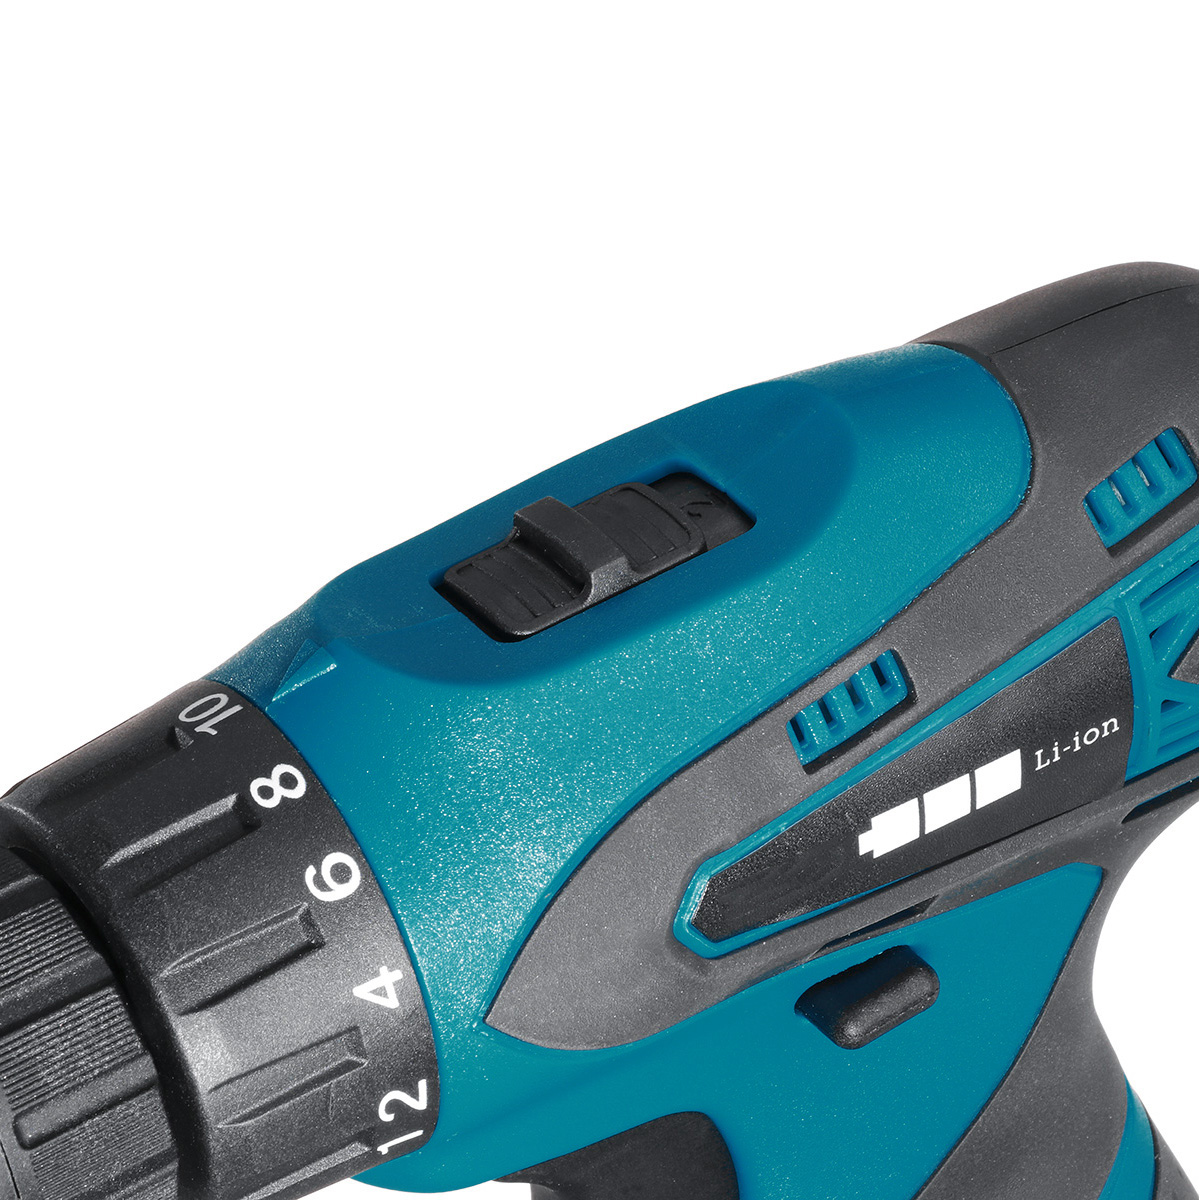 168V-Cordless-Electric-Drill-Driver-231-Torque-Multifuntional-Screwdriver-Power-Tool-W-Battery--Dril-1863336-11